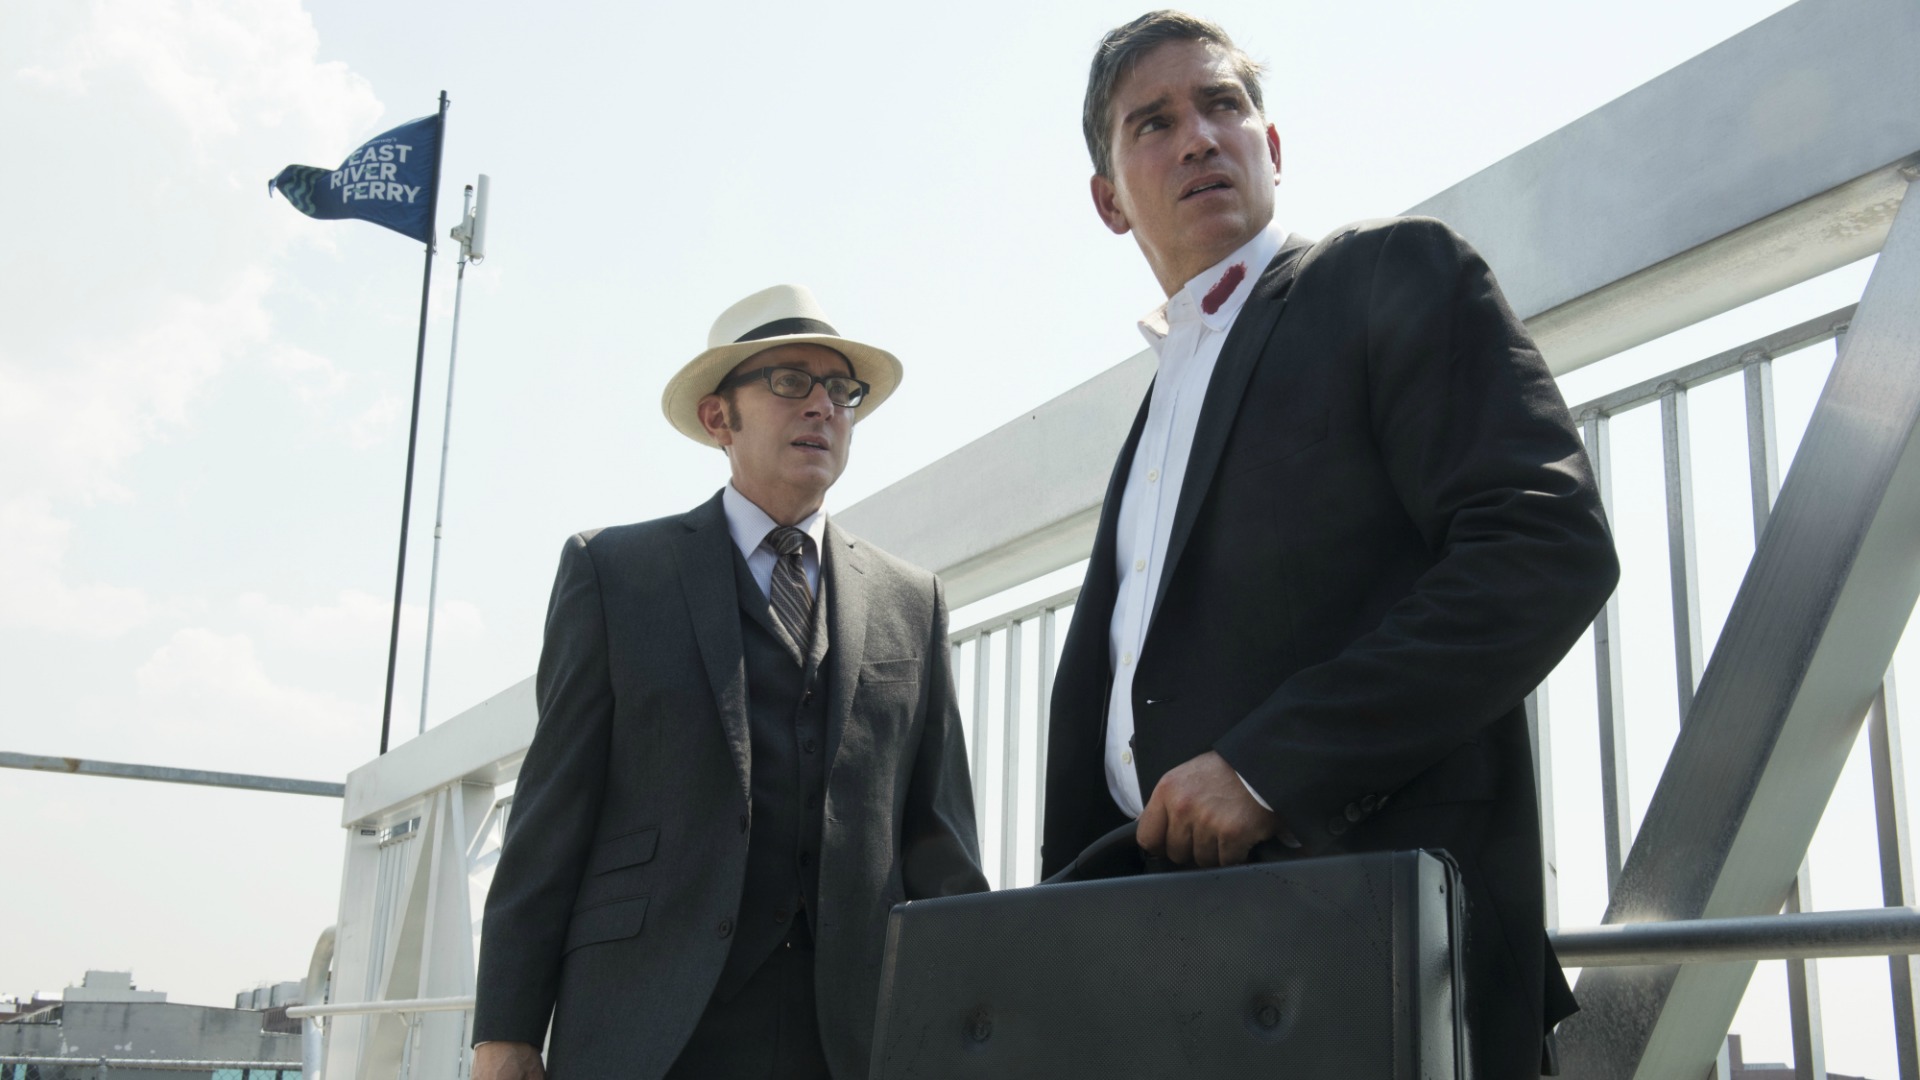 Person Of Interest Season 5 premieres on Tuesday, May 3 at 10/9c. 